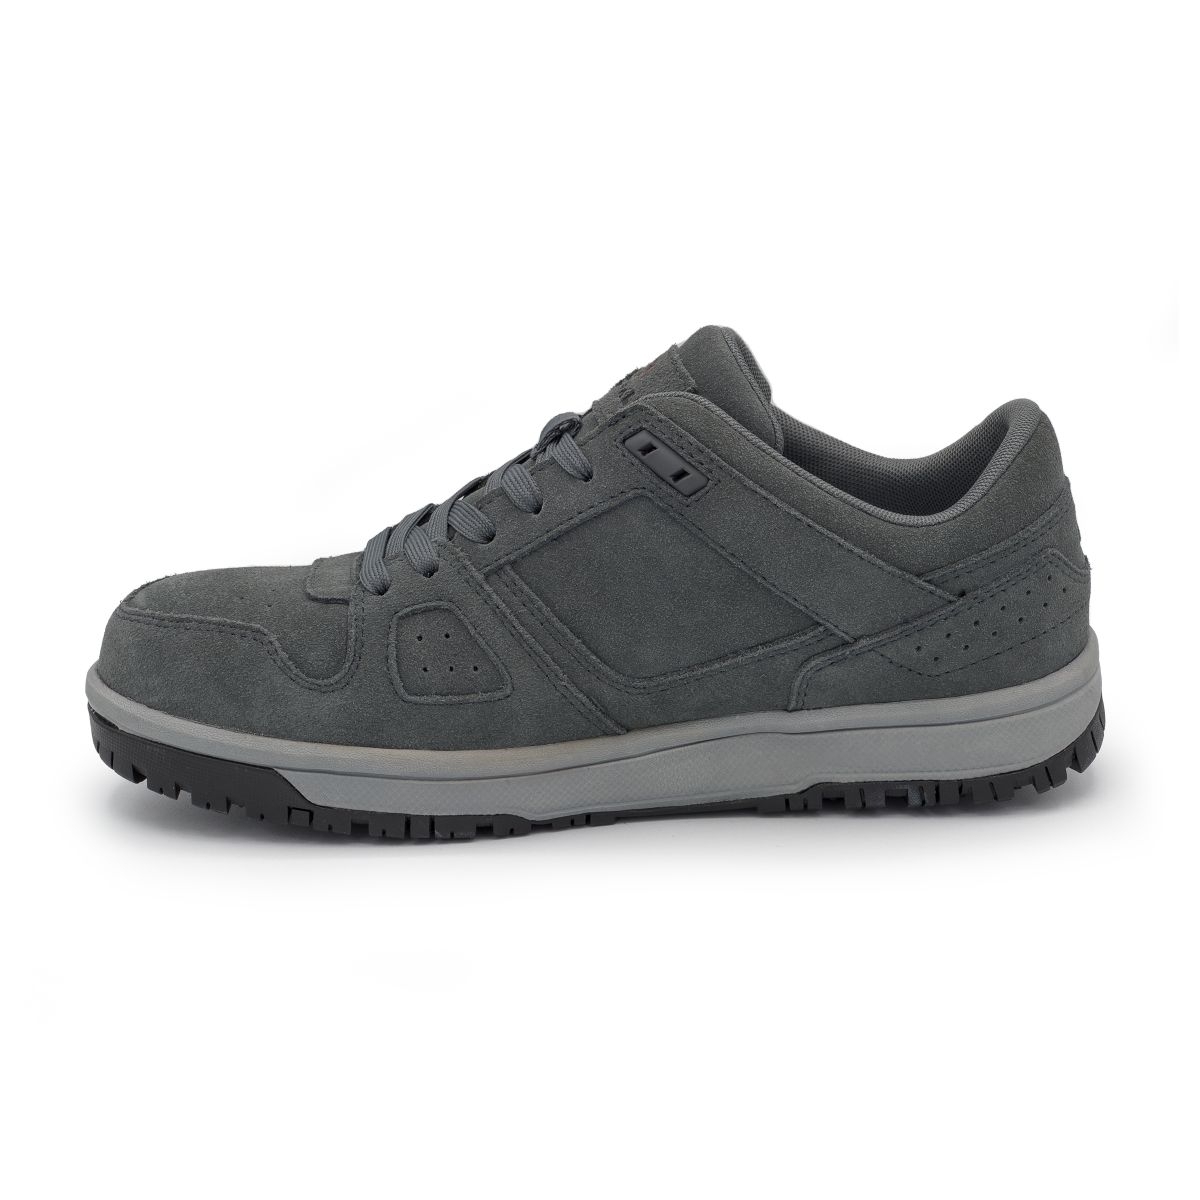 AIRWALK SAFETY Men's Mongo Composite Toe EH Work Shoe Charcoal/Grey - AW6301 CHARCOAL/GRAY - CHARCOAL/GRAY, 10-W